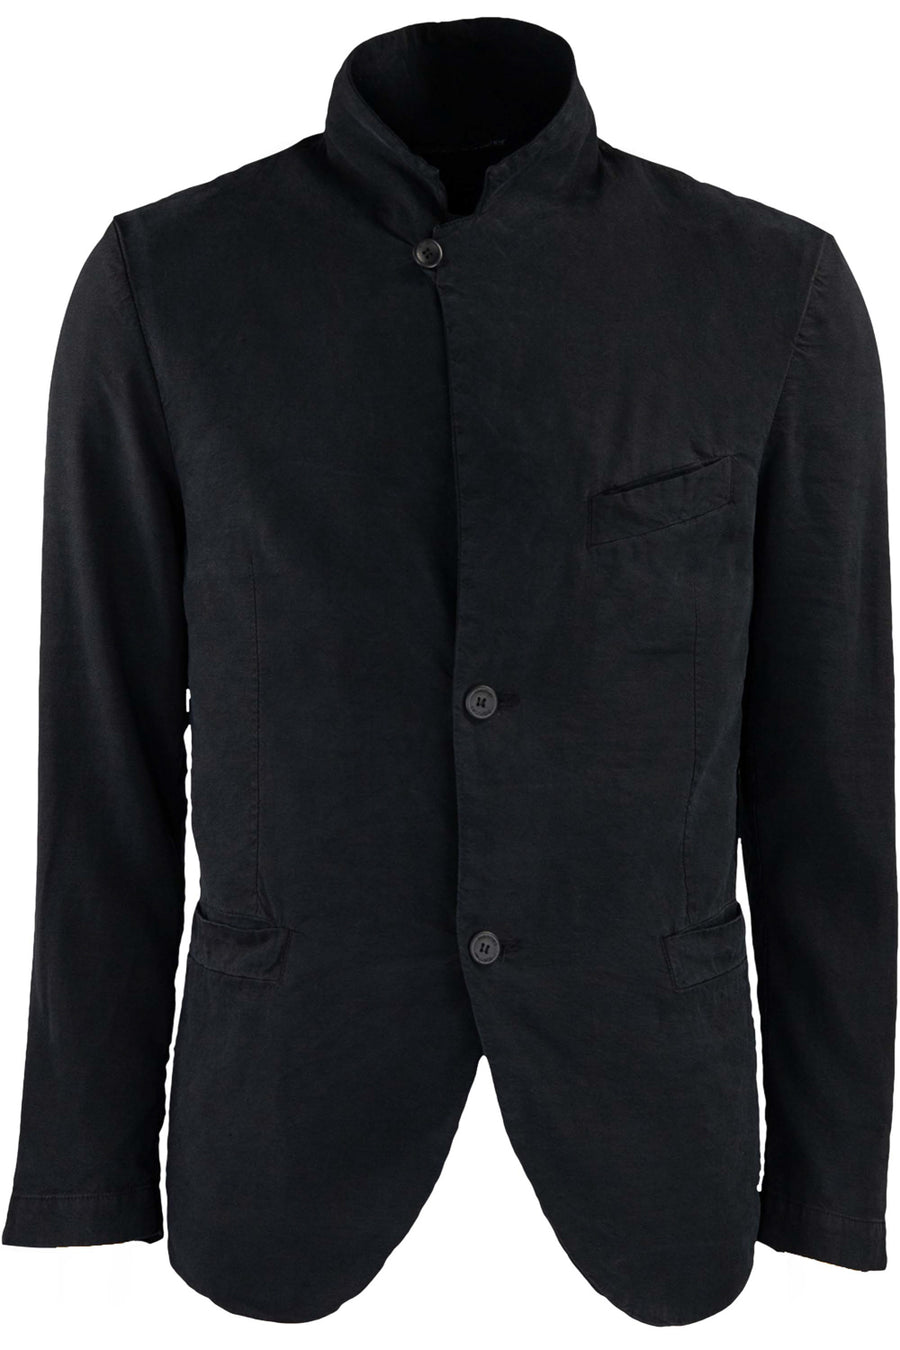 Buy the Hannes Roether Linen/Silk Blazer in Black at Intro. Spend £50 for free UK delivery. Official stockists. We ship worldwide.